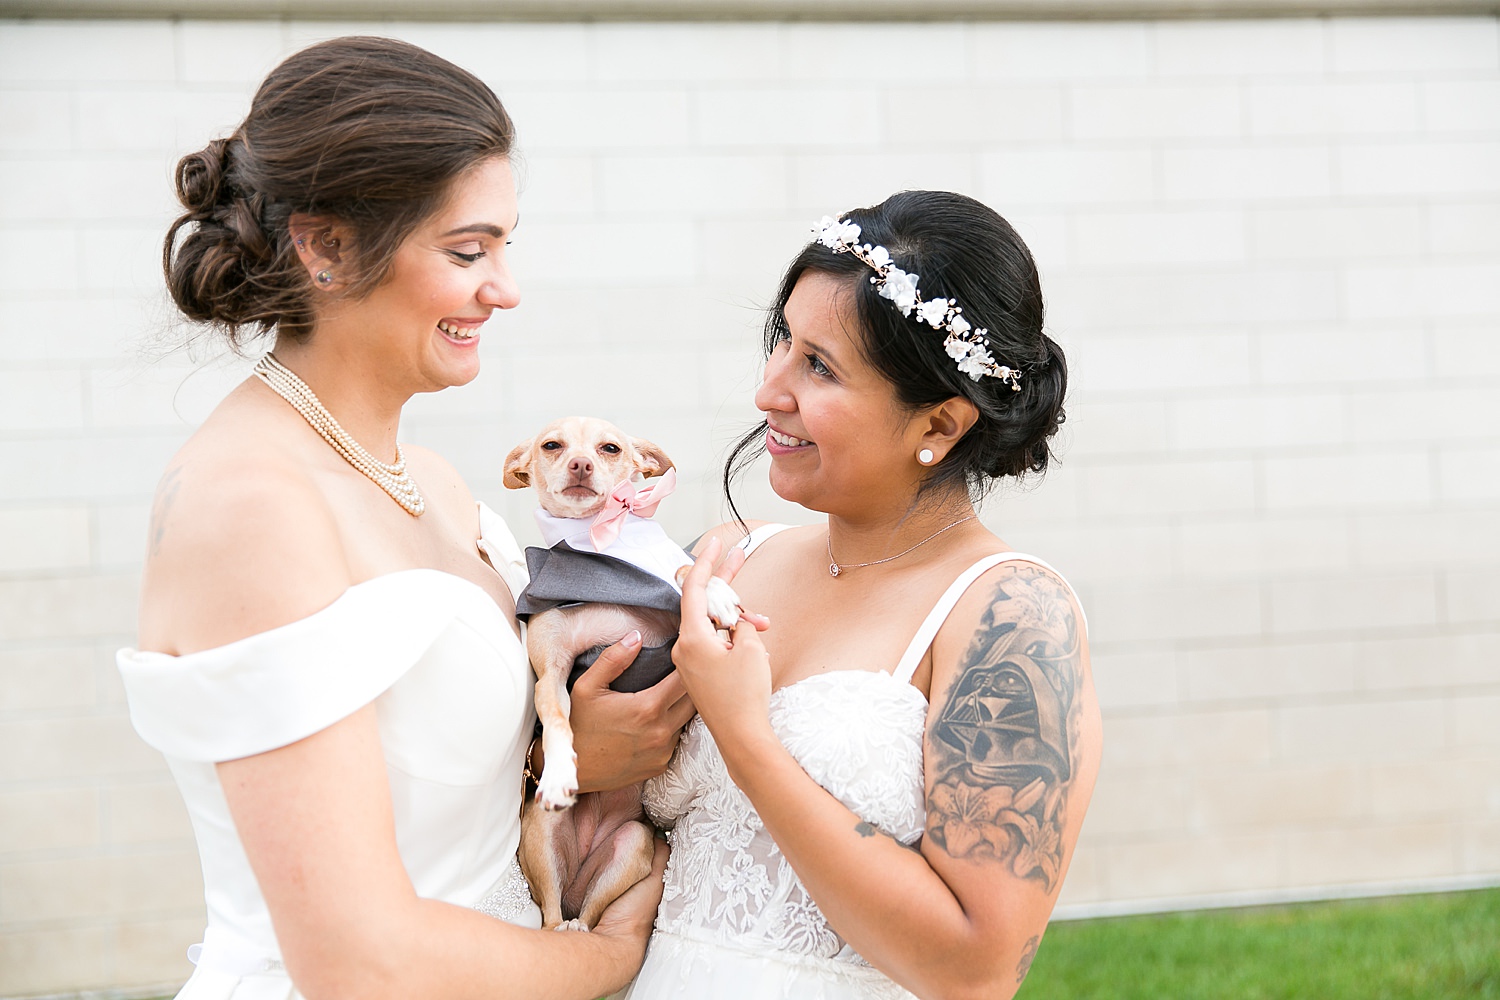 Brides with their dog wearing bow tie.